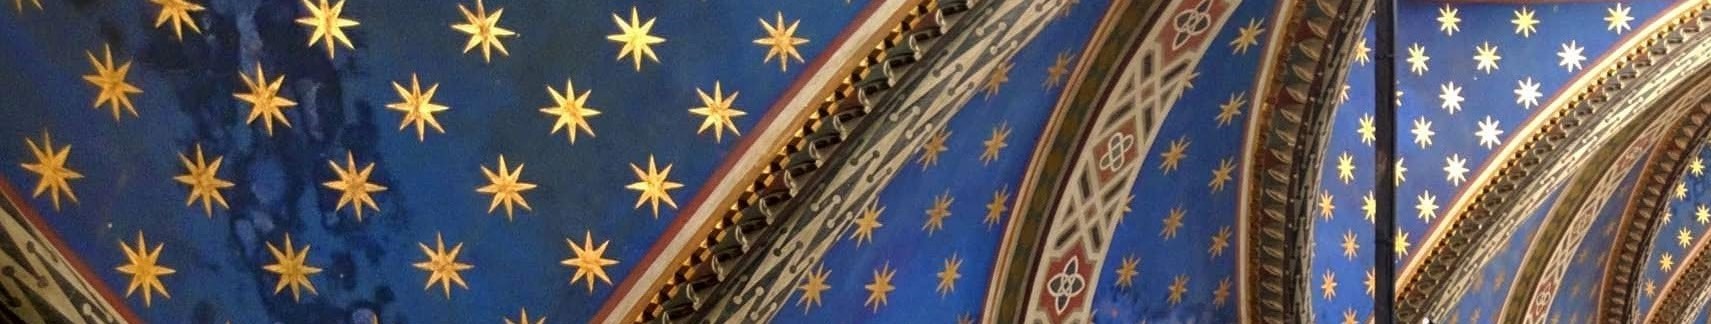 Starry Ceiling from Florence